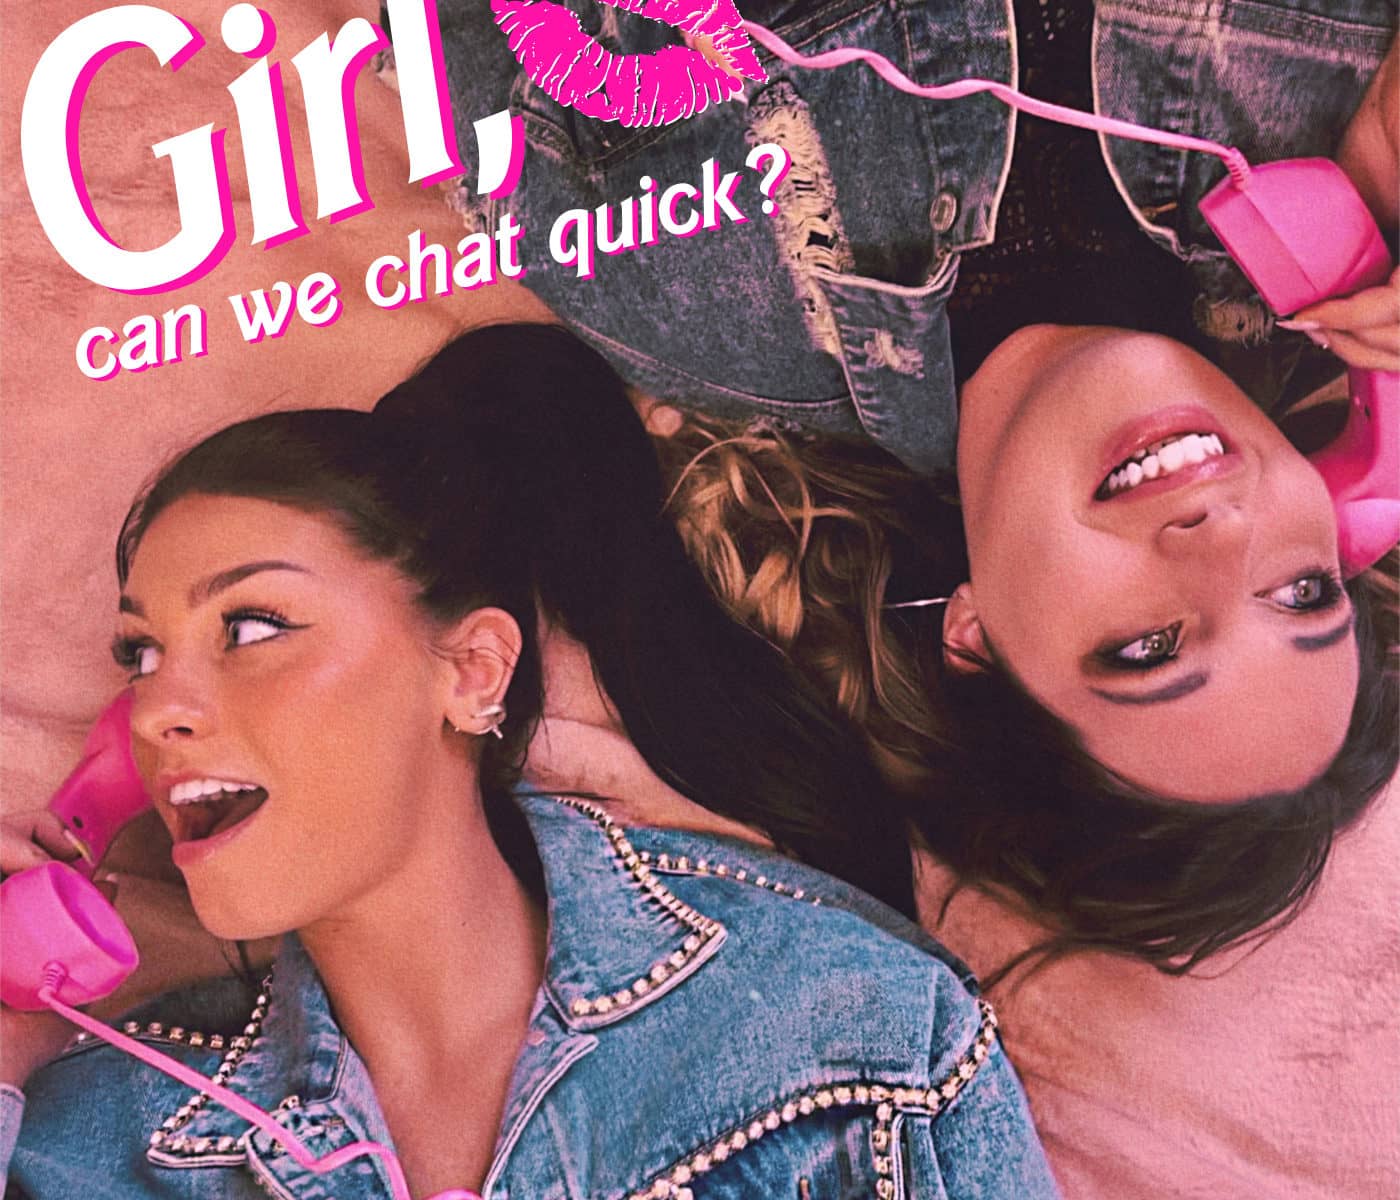 girl_can_we_chat_quick_podcast-19